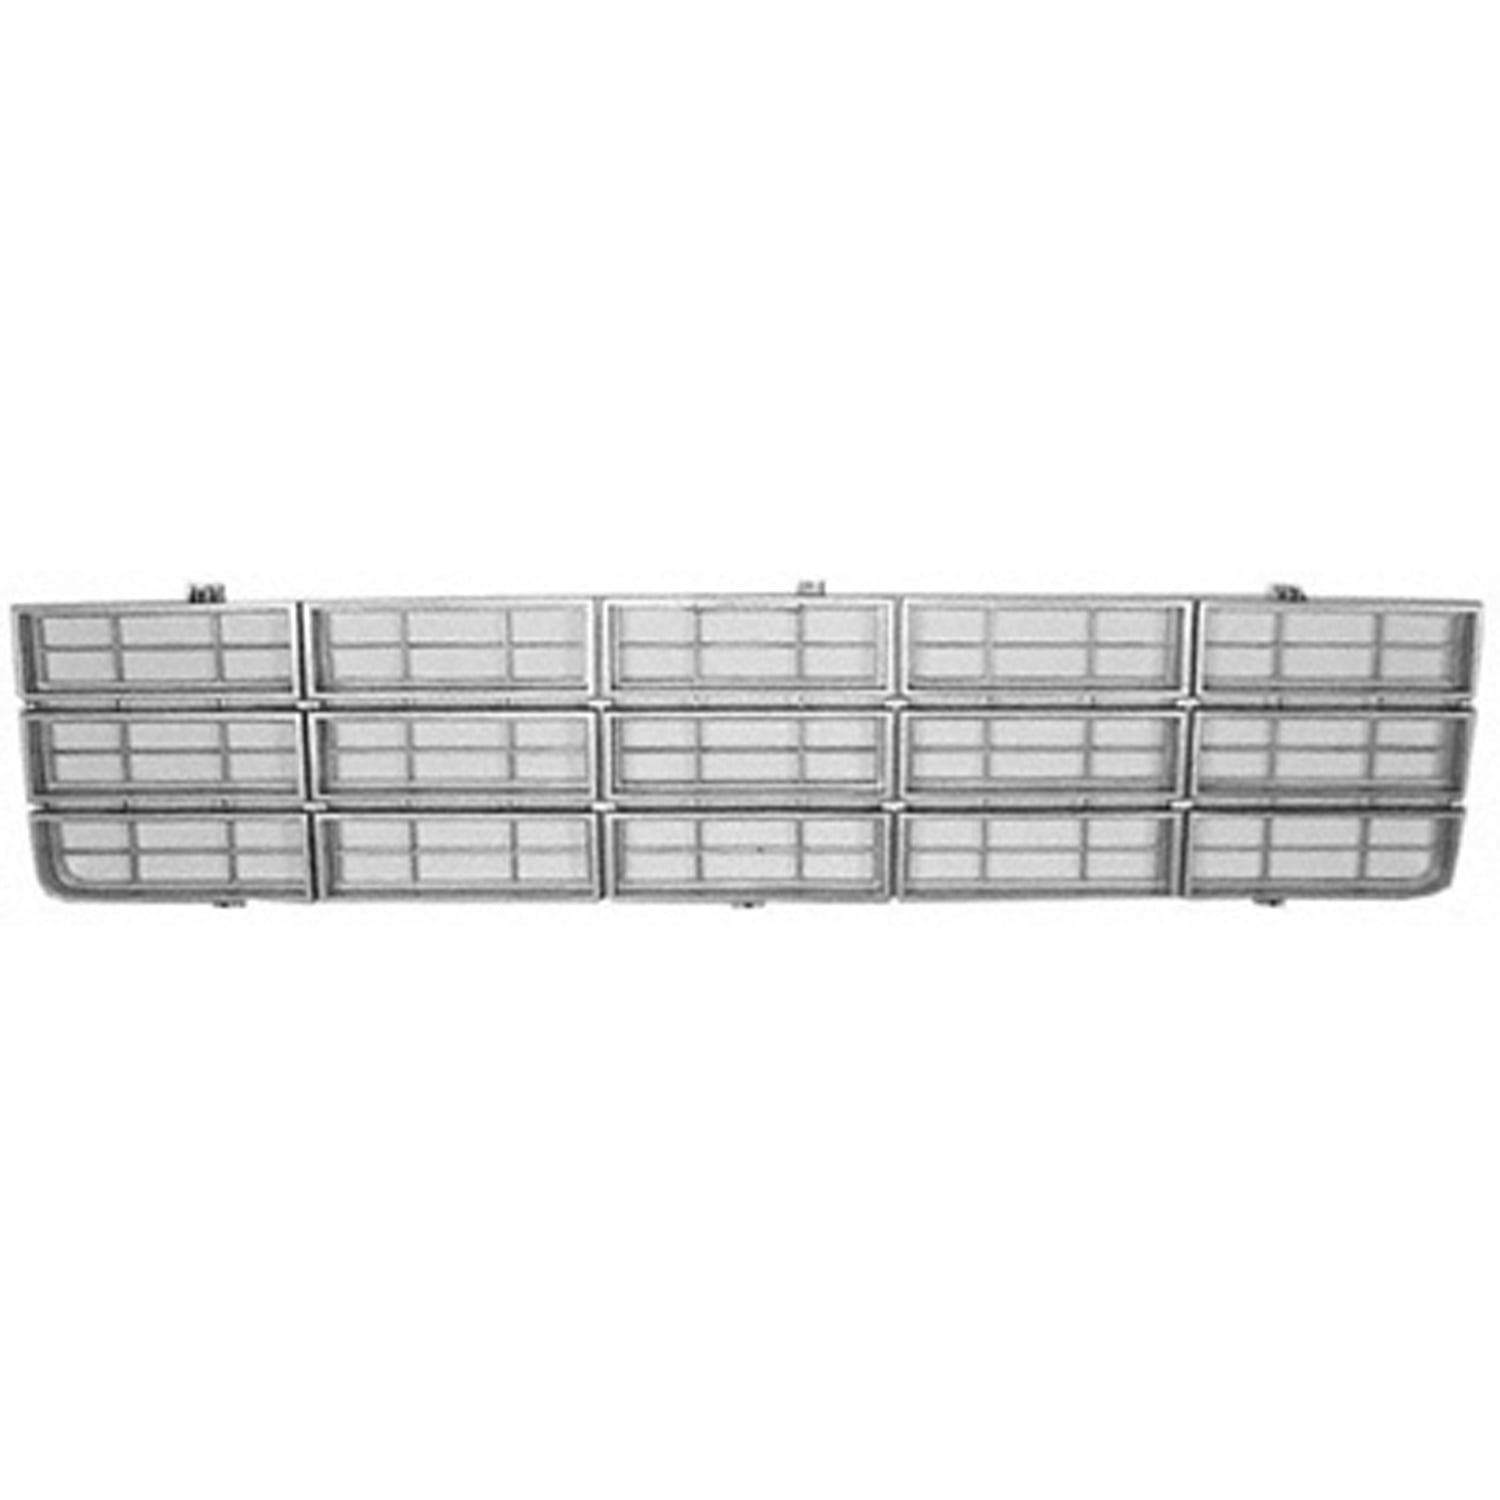 Blazer & Pickup Chevy Light Silver Finish GM1200354 370536 New Front Side Grille For 1977-1979 Chevrolet Suburban 